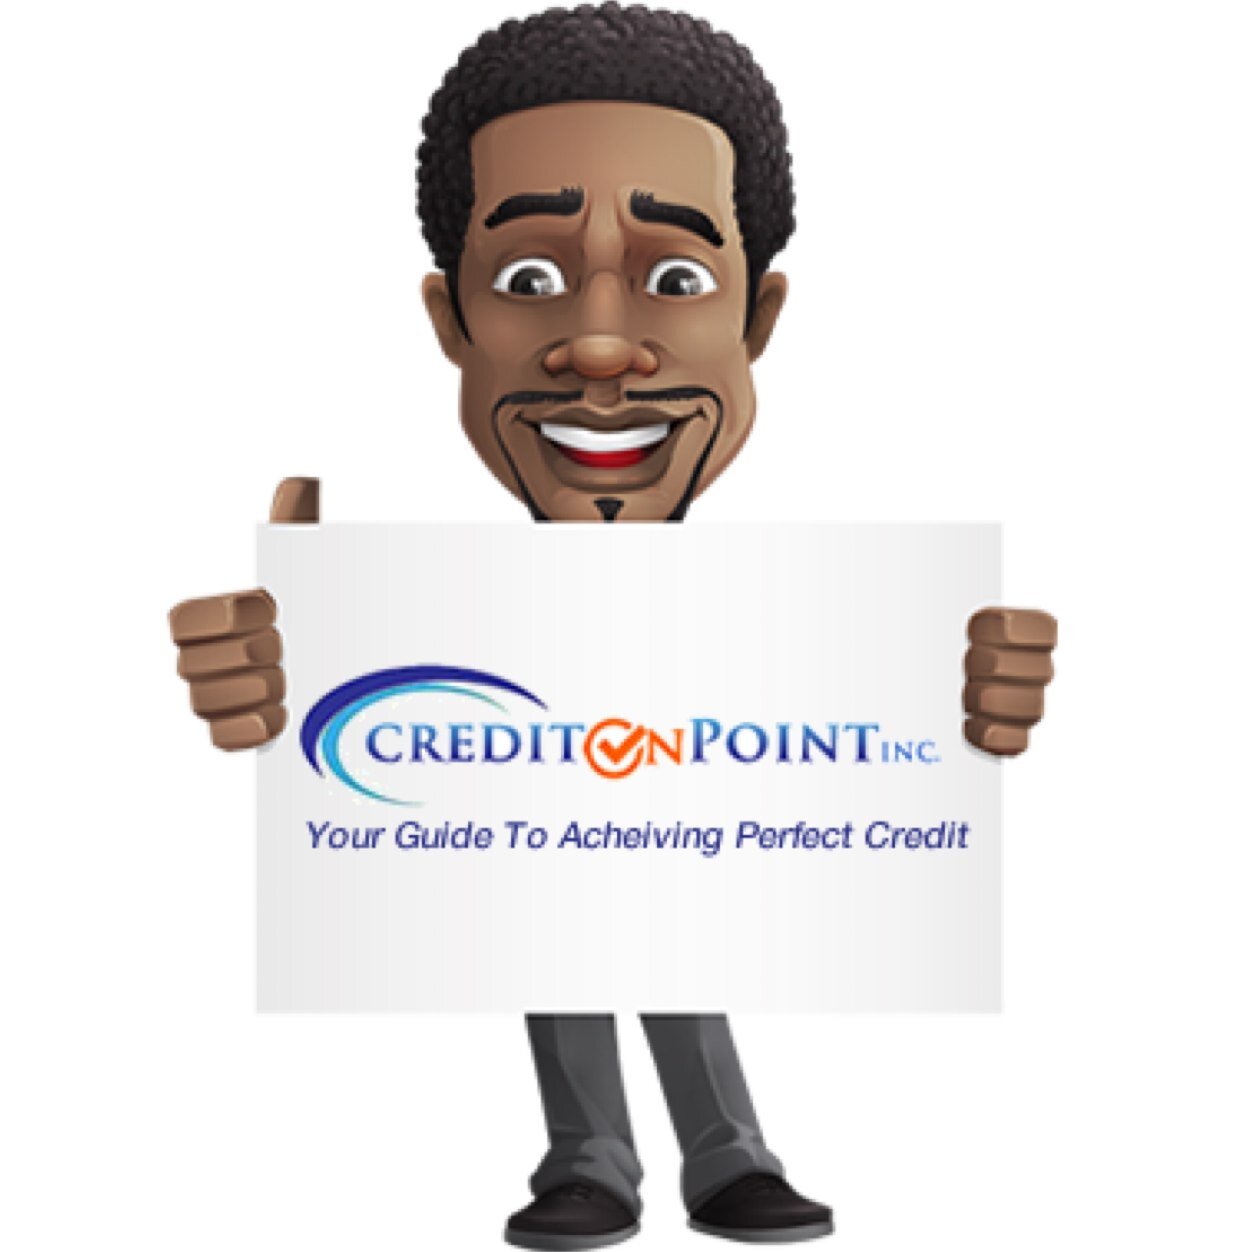 Credit On Point INC. is a credit repair company established by Founder Jerry Chadavoine. We thrive on improving our clients credit as well as their lives.